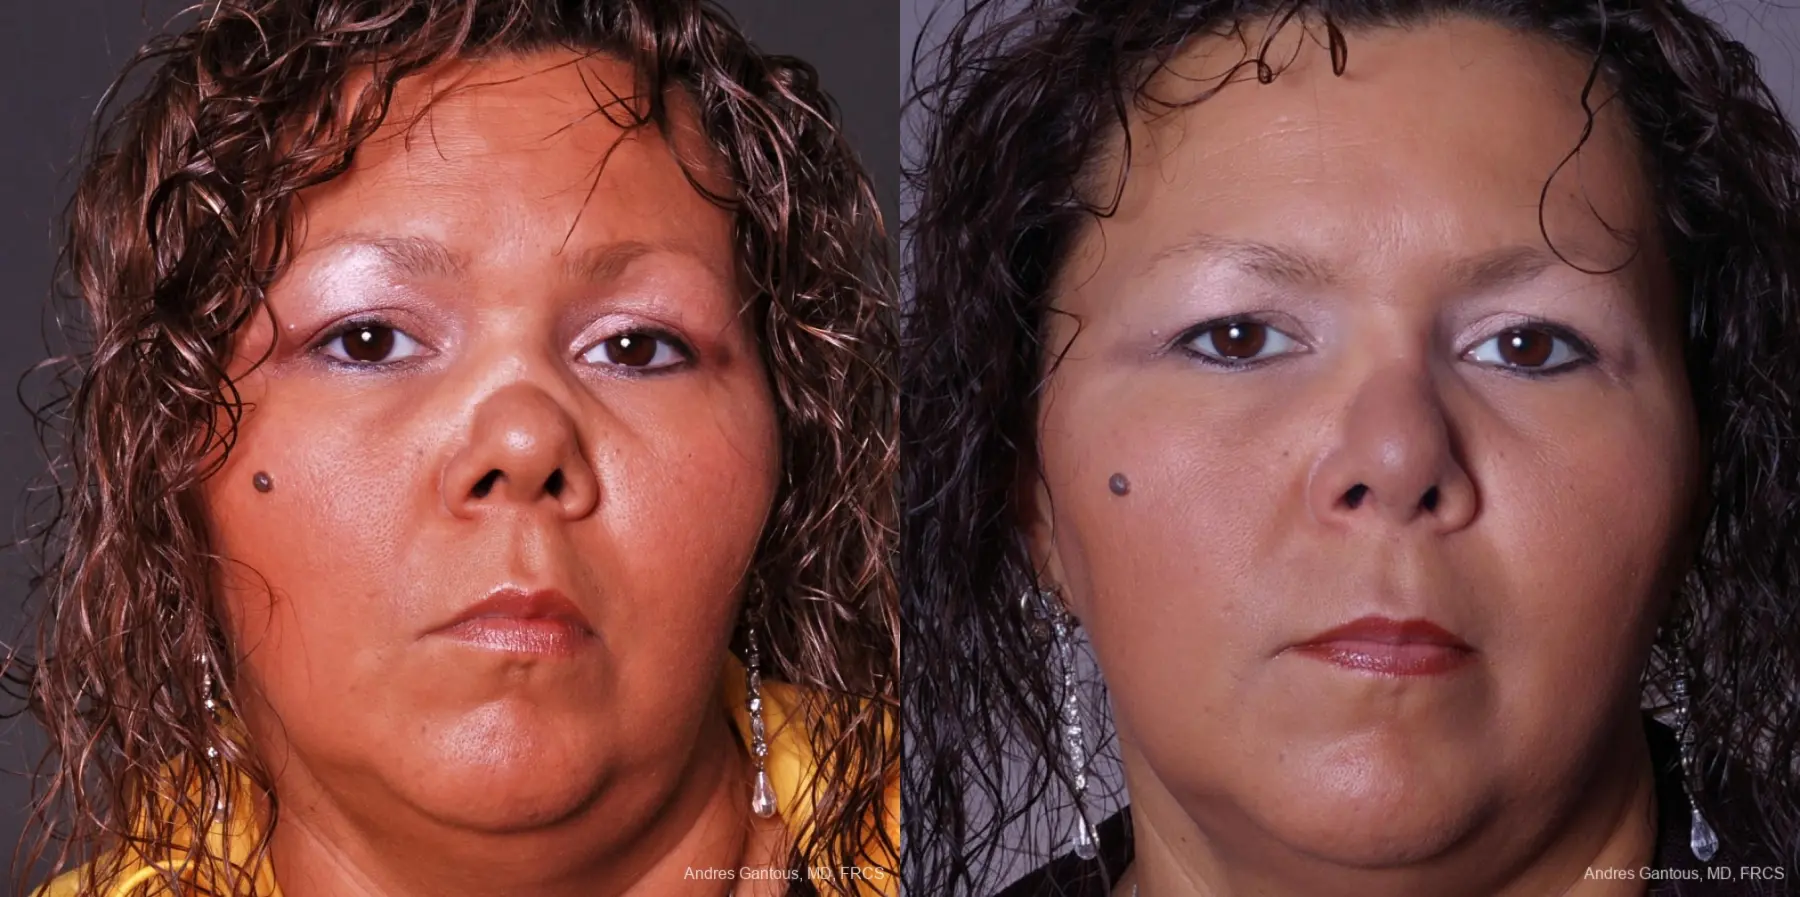 Reconstructive Rhinoplasty: Patient 1 - Before and After 1